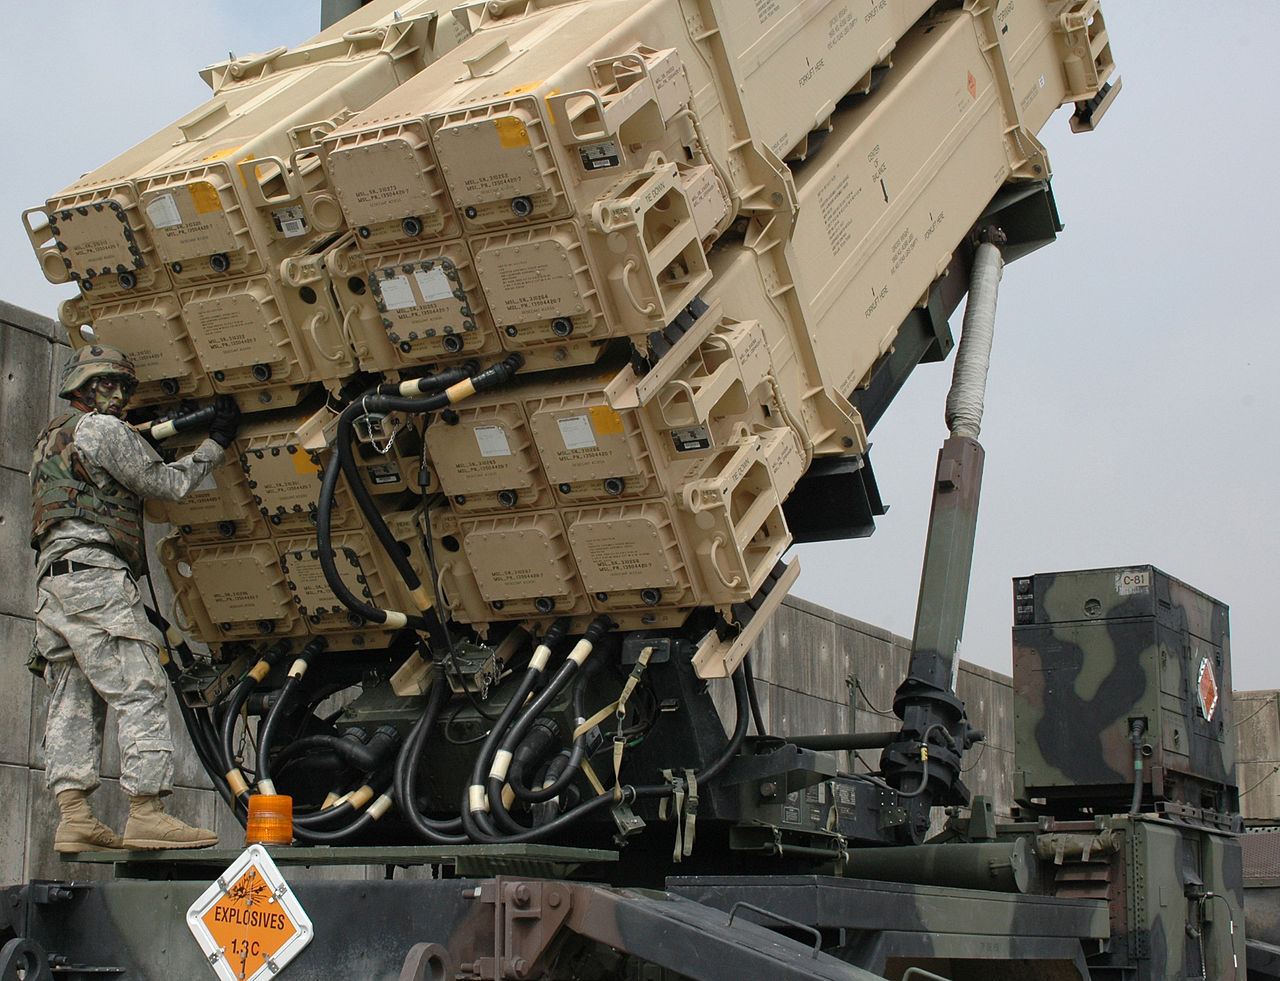 1280px-Maintenance_check_on_a_Patriot_missile-١.jpg